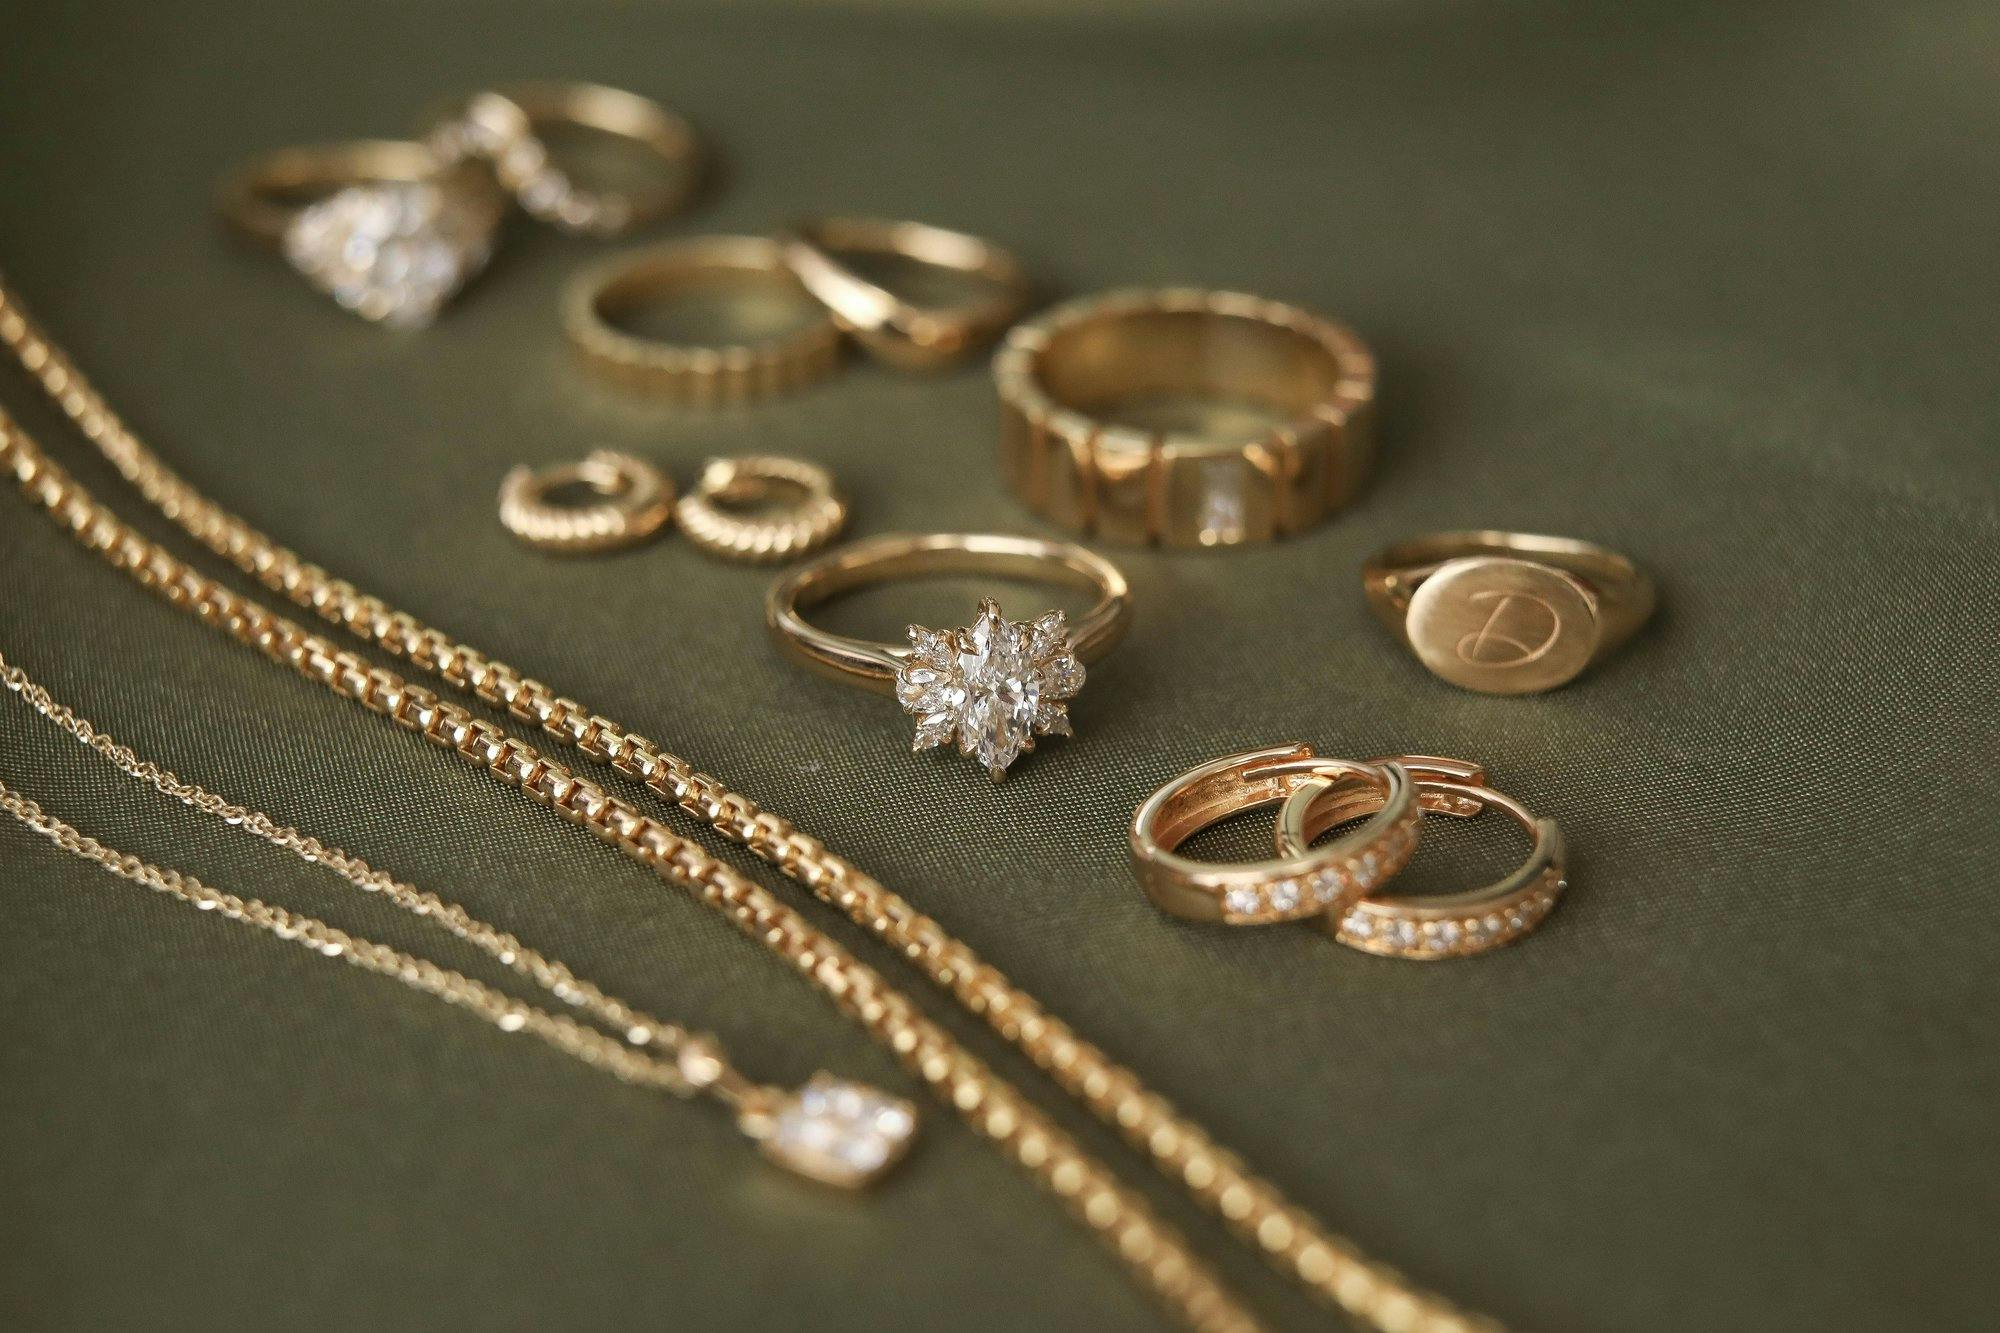 group shot of gold jewelry 